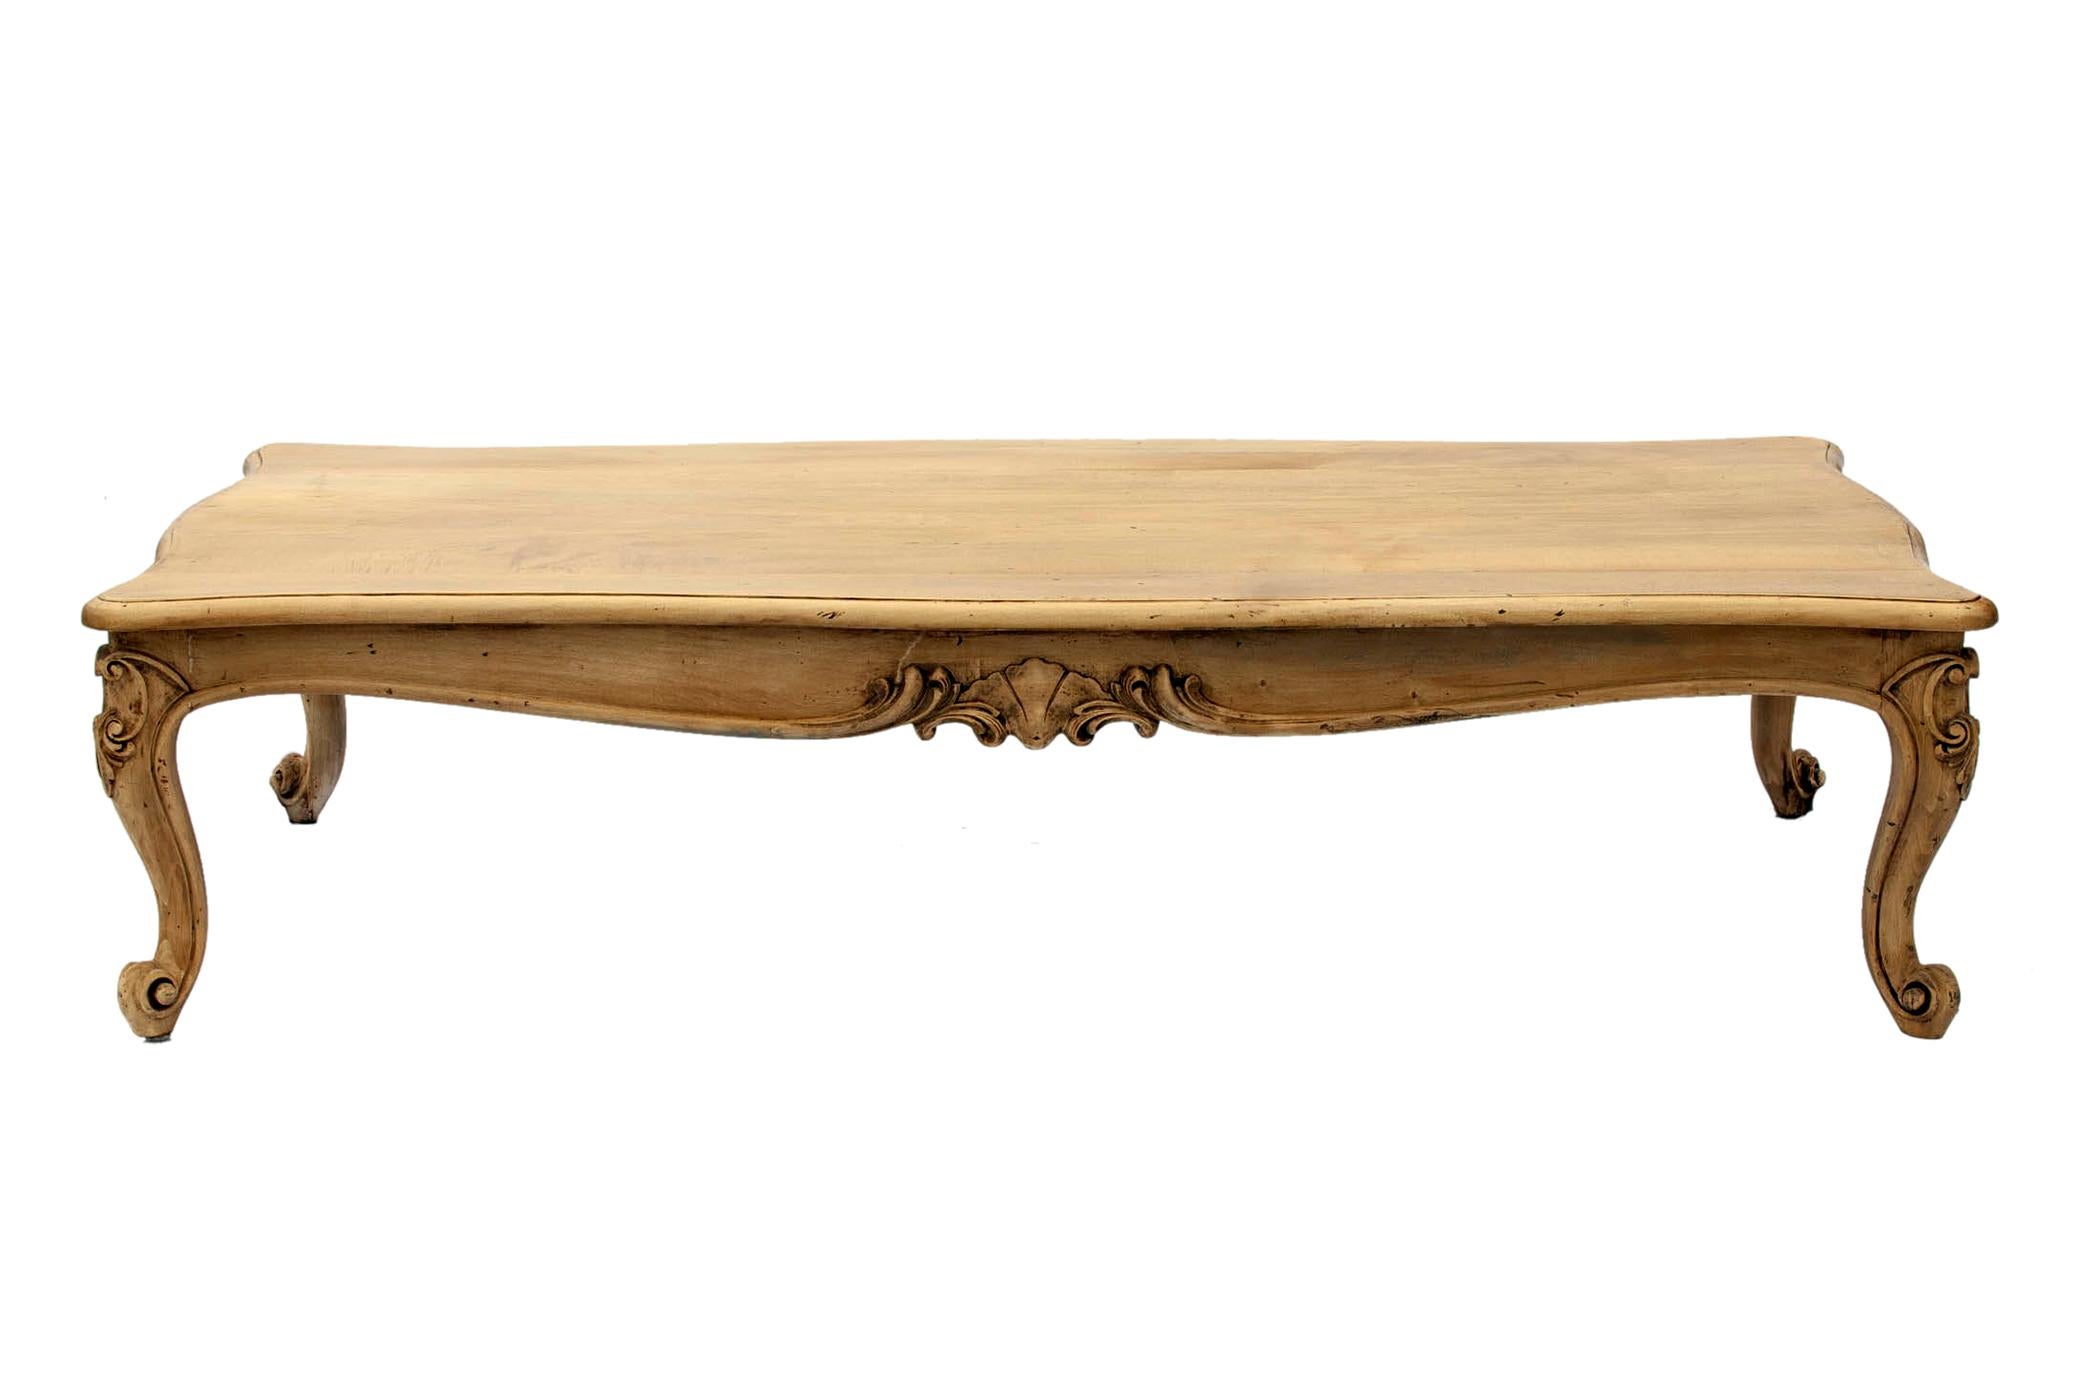 Hand carved European cocktail table in pale hardwood.
An elongated rectangular, the top features long planks resting on four provincial legs with a hand carved apron.
The oversized table features a natural wax finish over a clear French varnish.
The